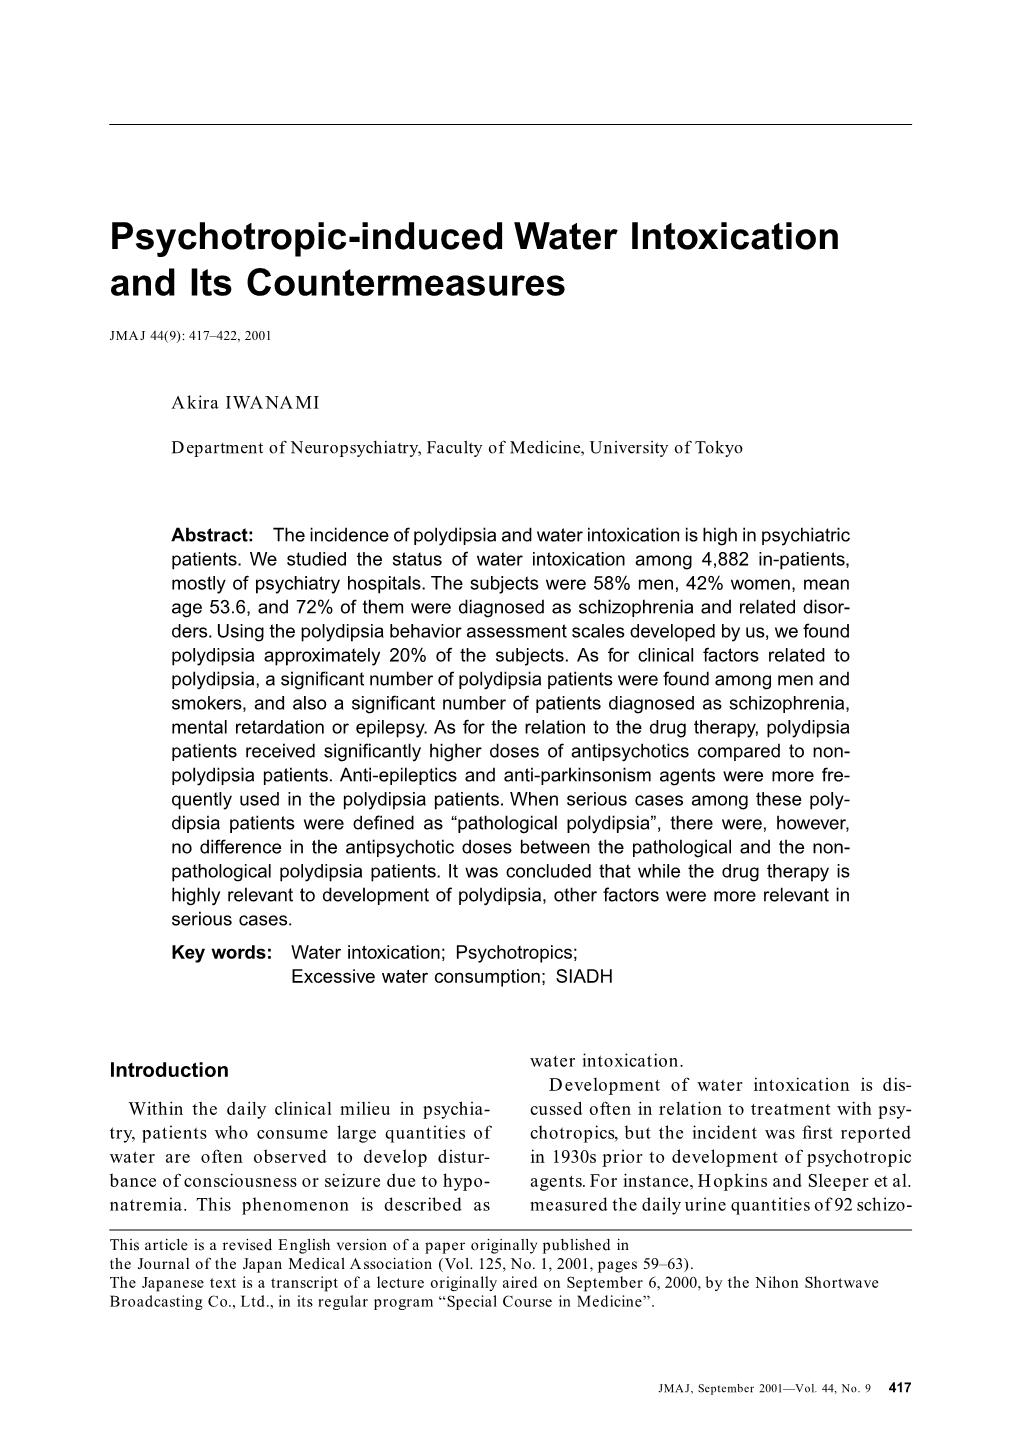 Psychotropic-Induced Water Intoxication and Its Countermeasures